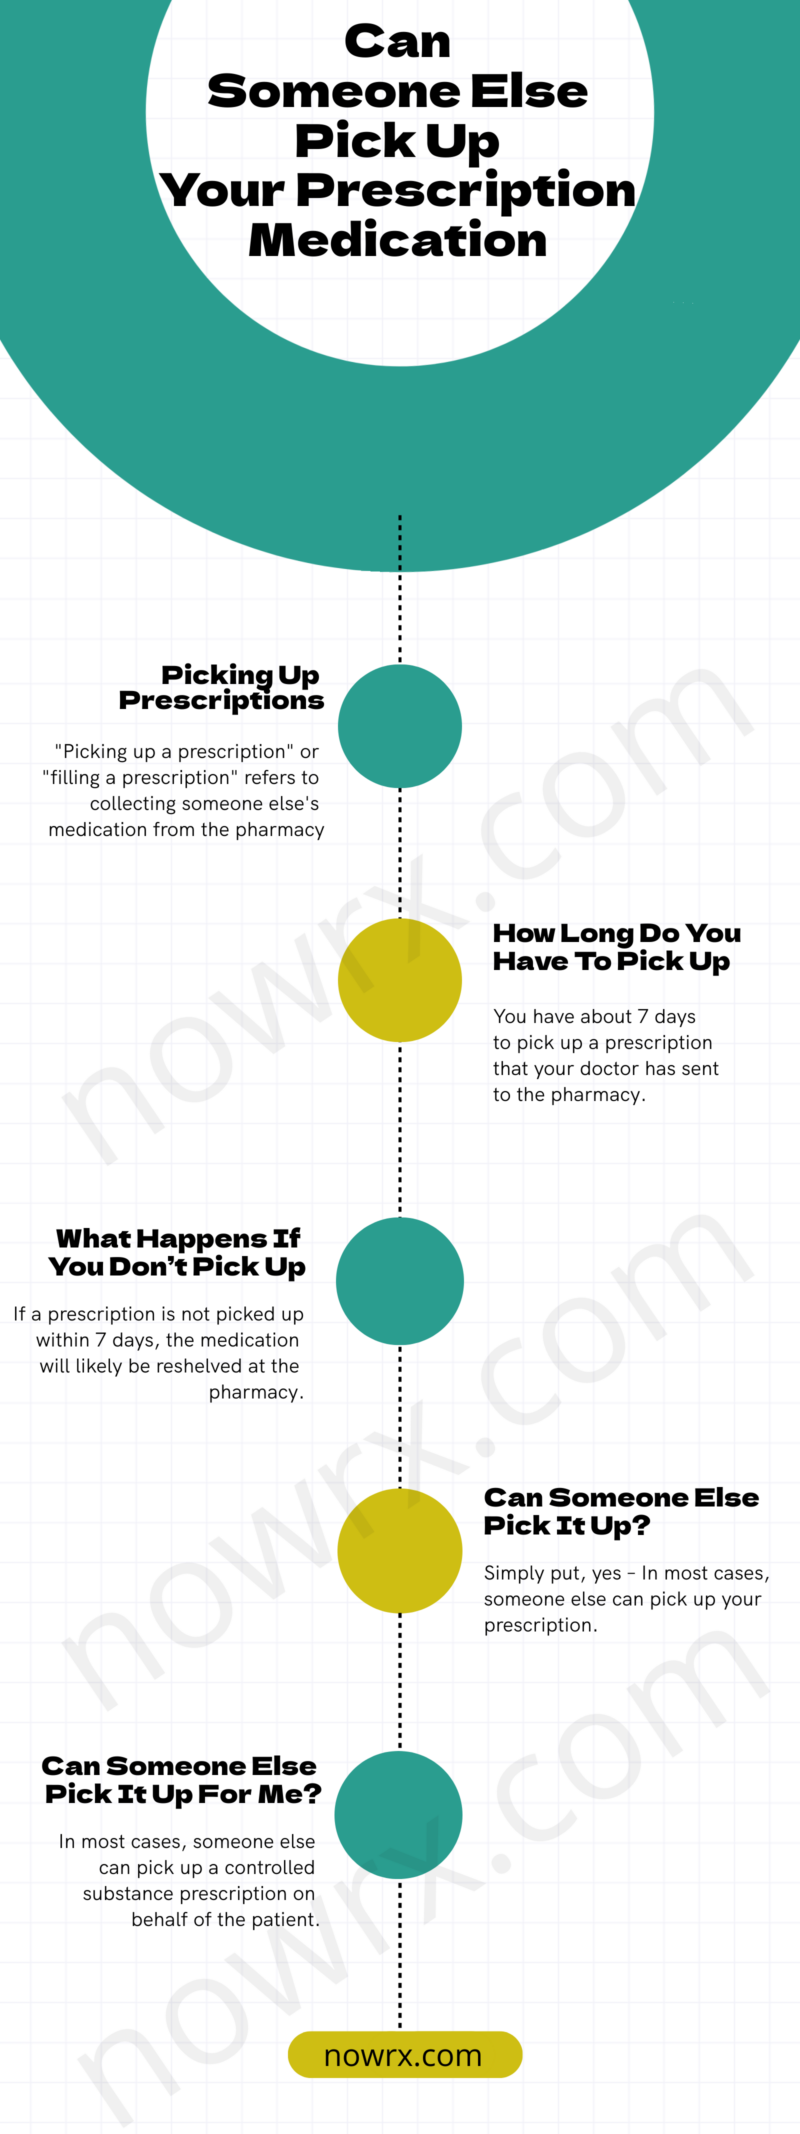 This infographic presents when someone else can or can't pick up your prescription medication